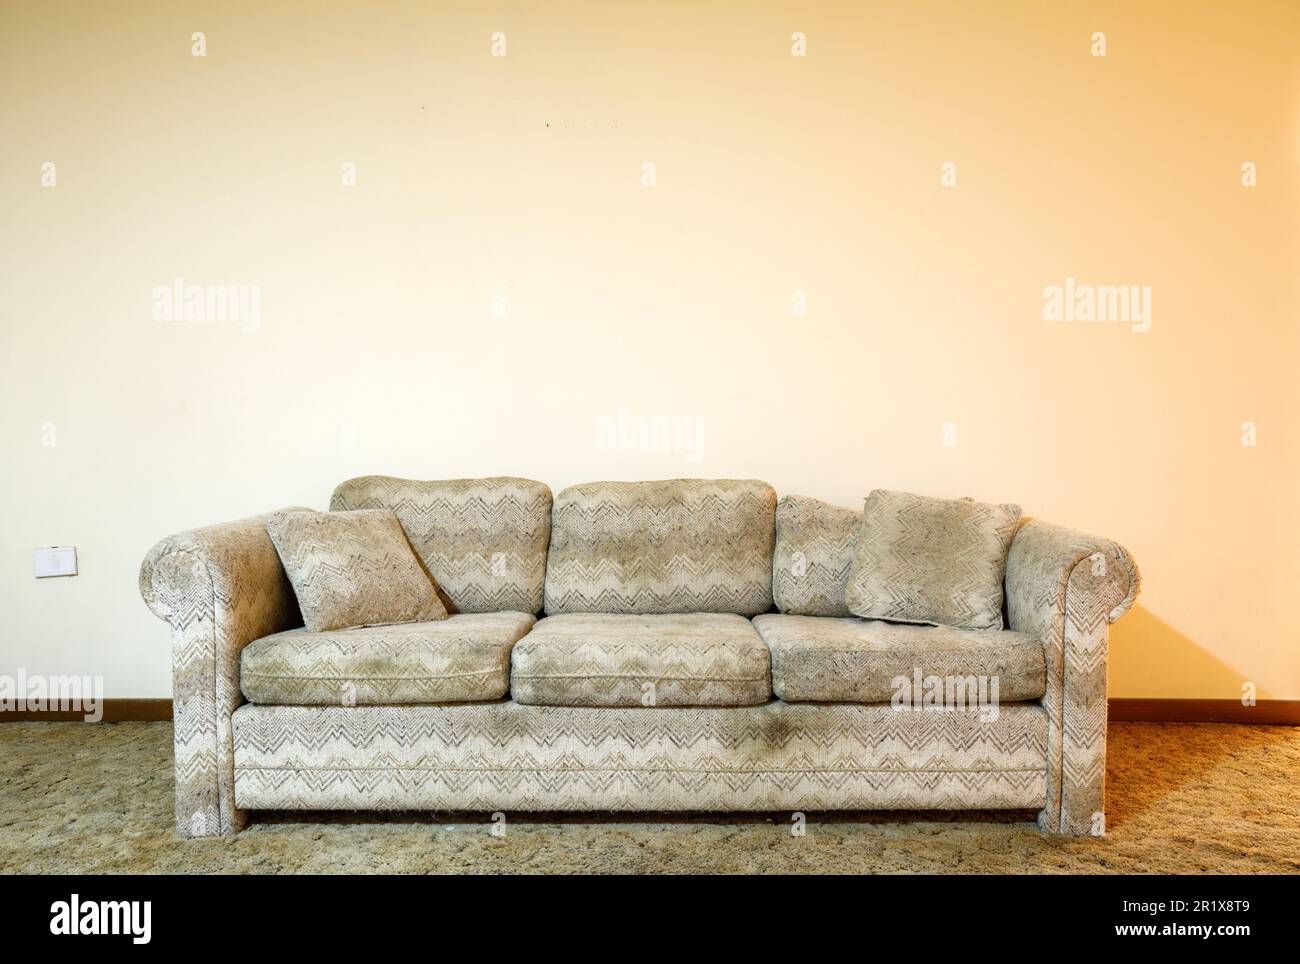 A dirty couch sitting in front of a starkly empty wall.  This house has since been demolished. Stock Photo